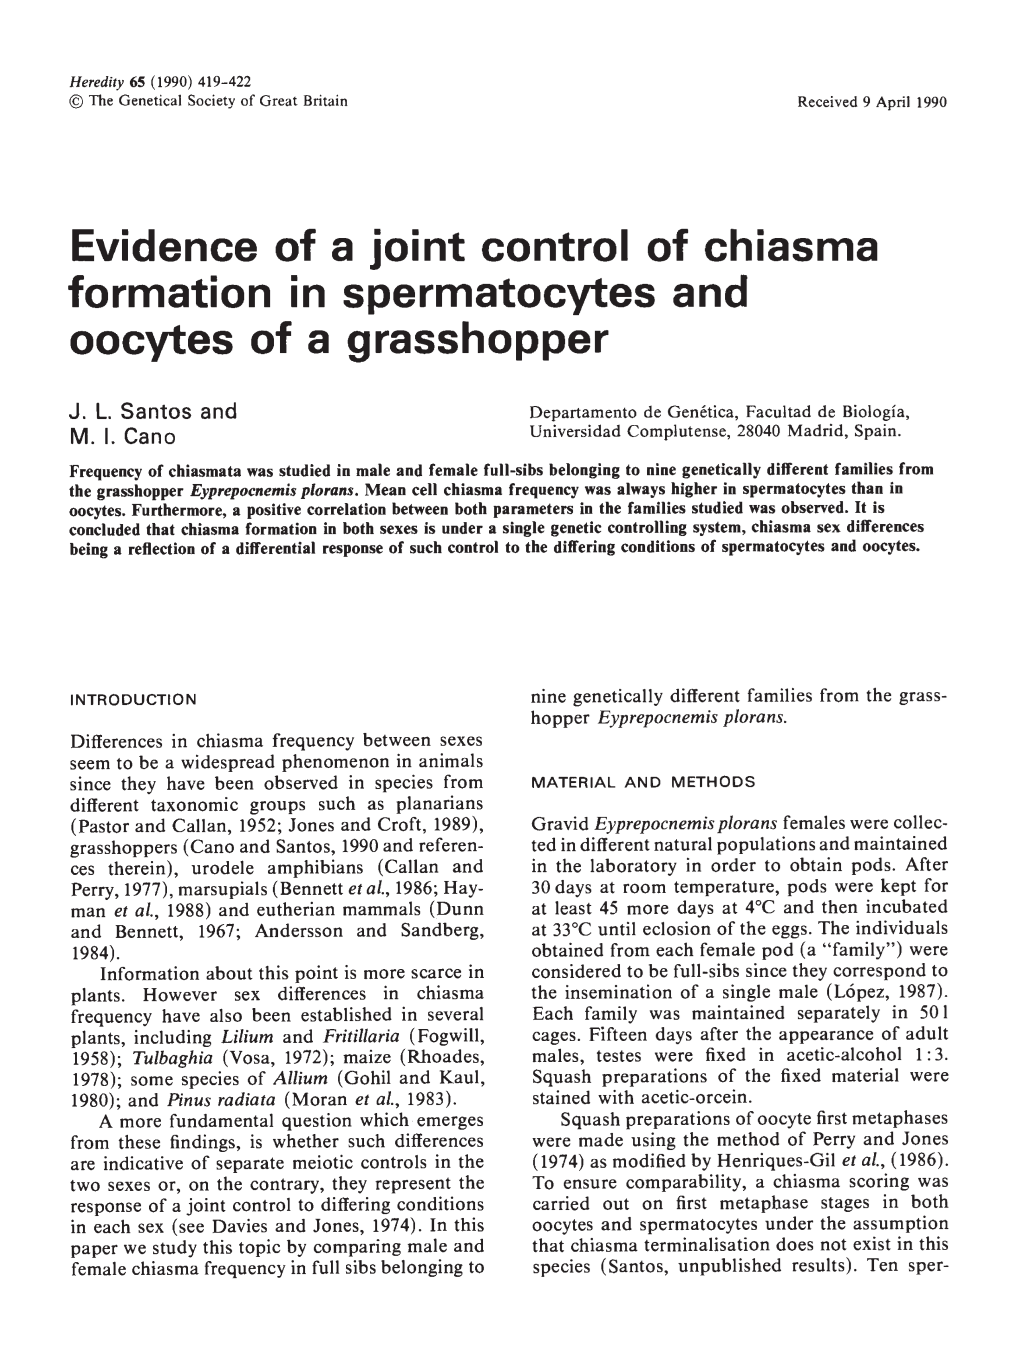 Evidence of a Joint Control of Chiasma Formation in Spermatocytes and Oocytes of a Grasshopper